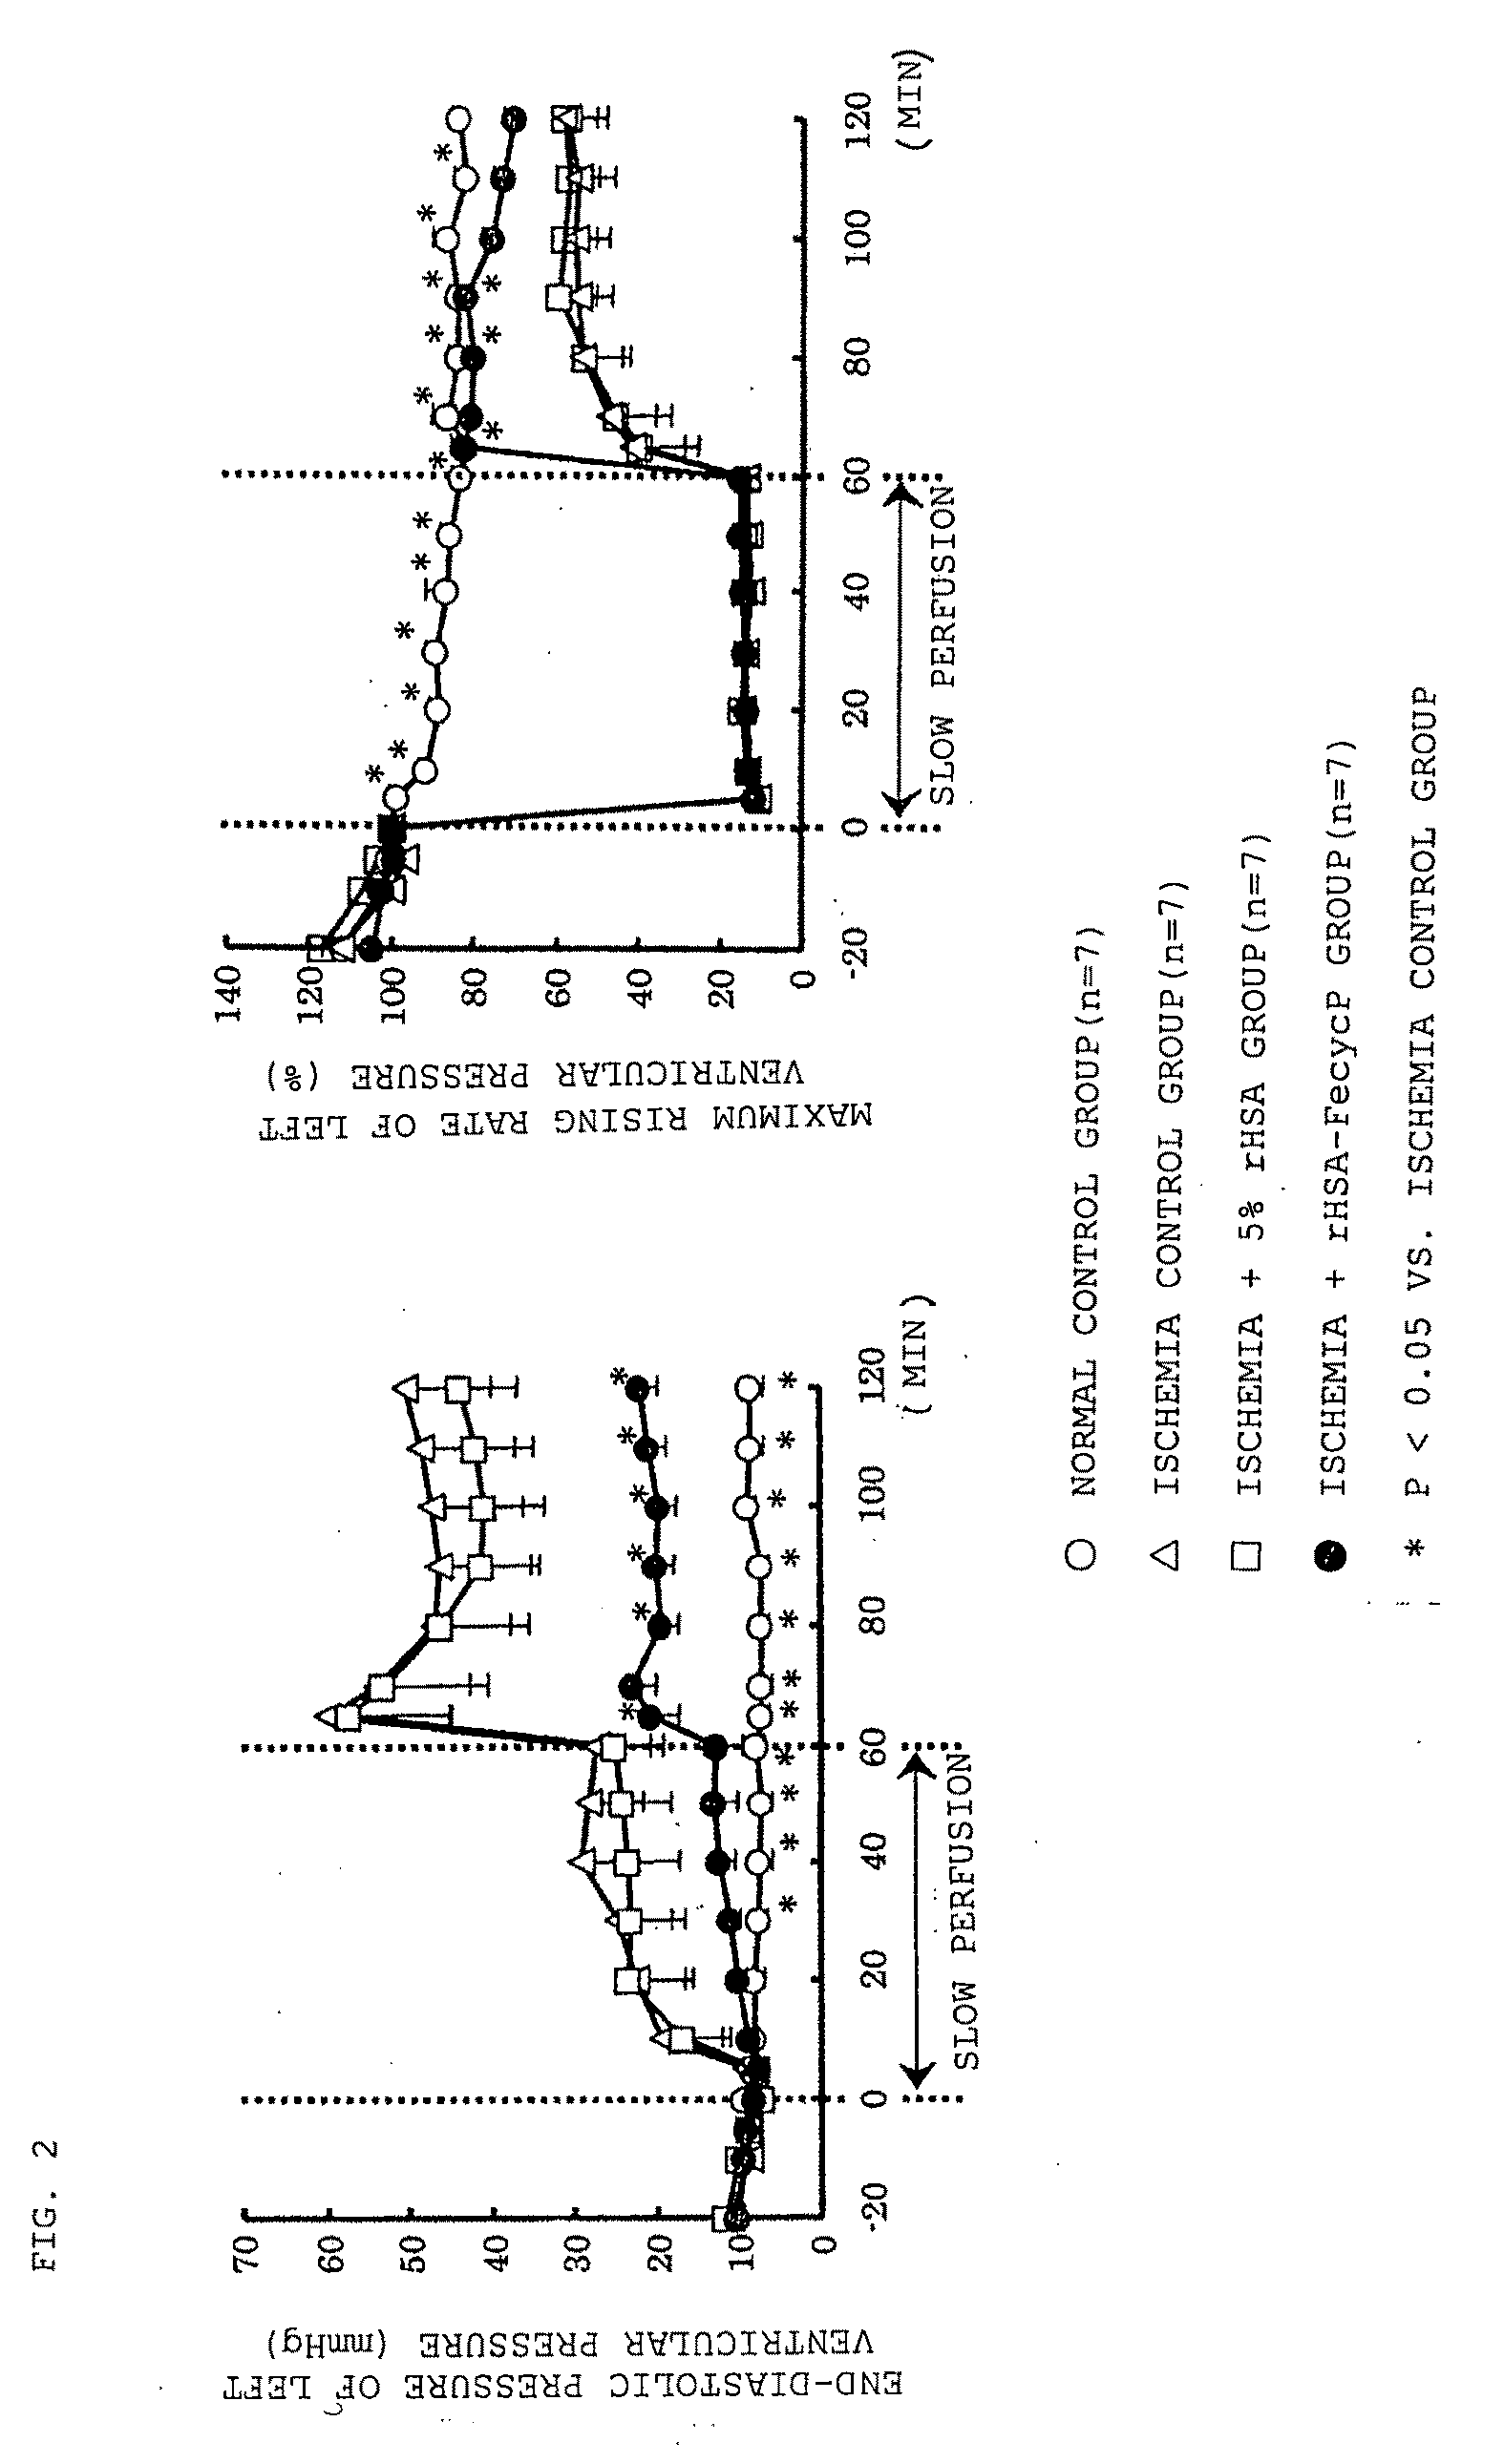 Agent for improving circulatory disorder